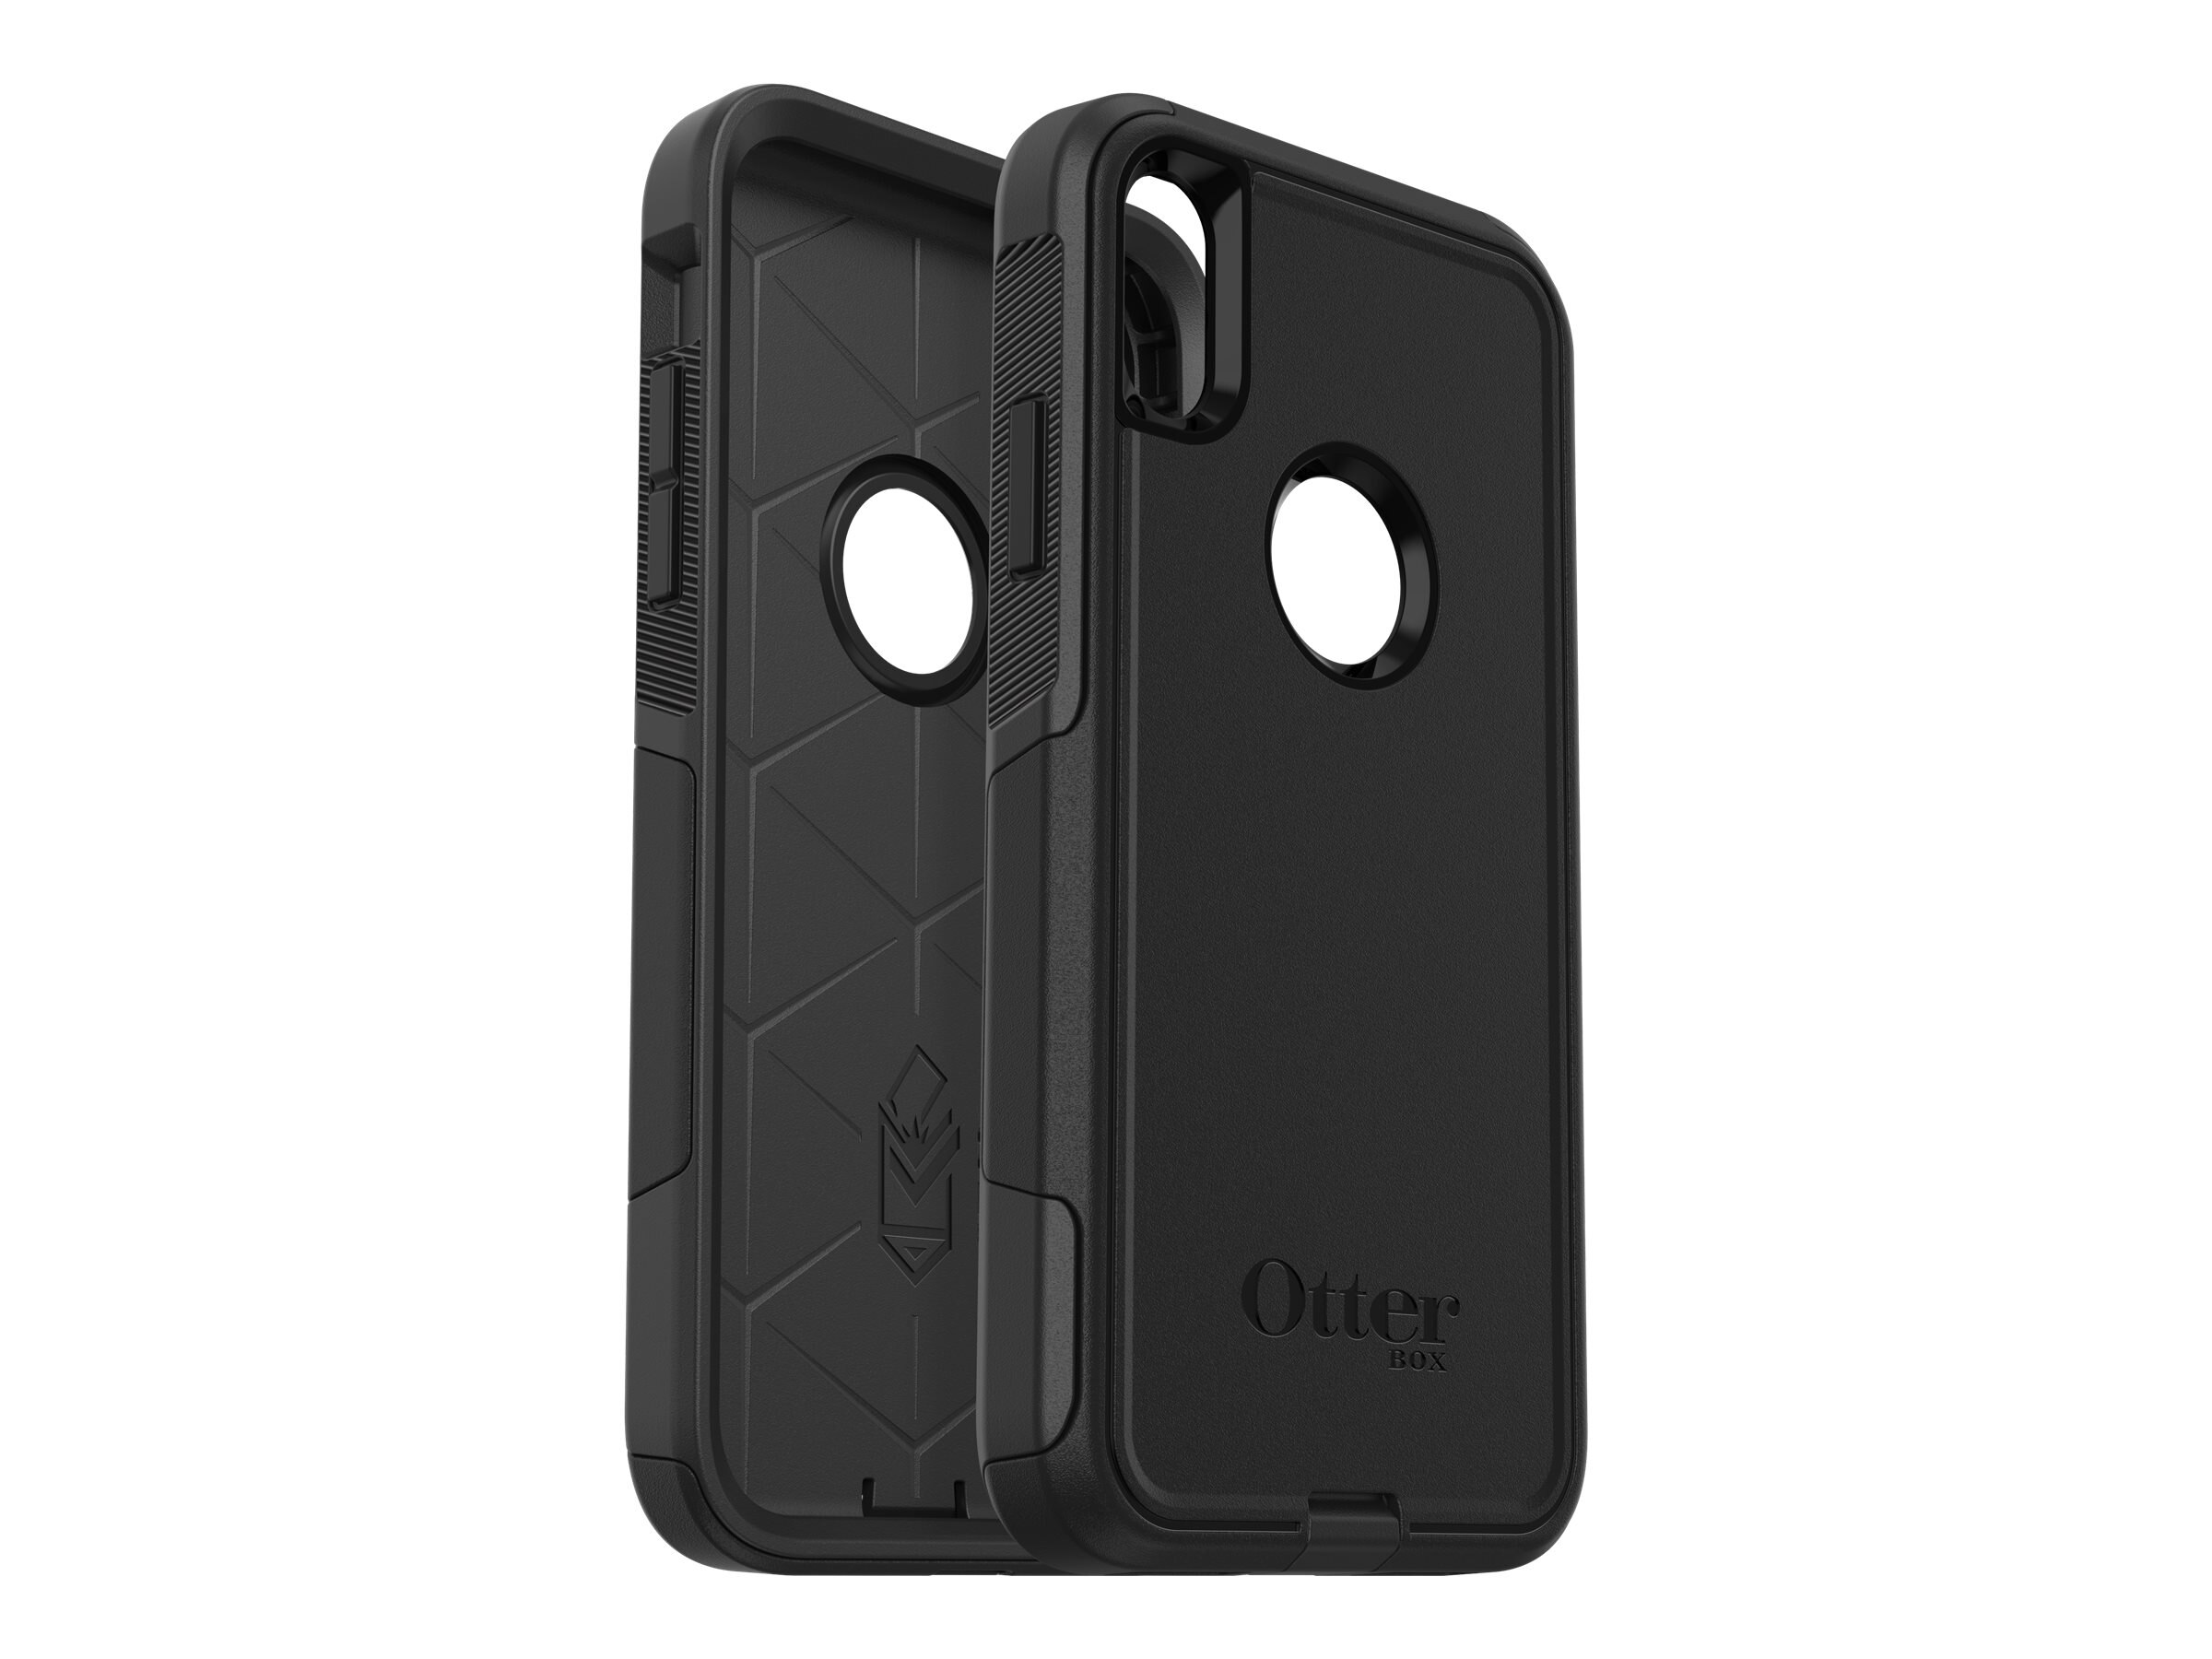 OtterBox Commuter Series Case for iPhone XR (Black)